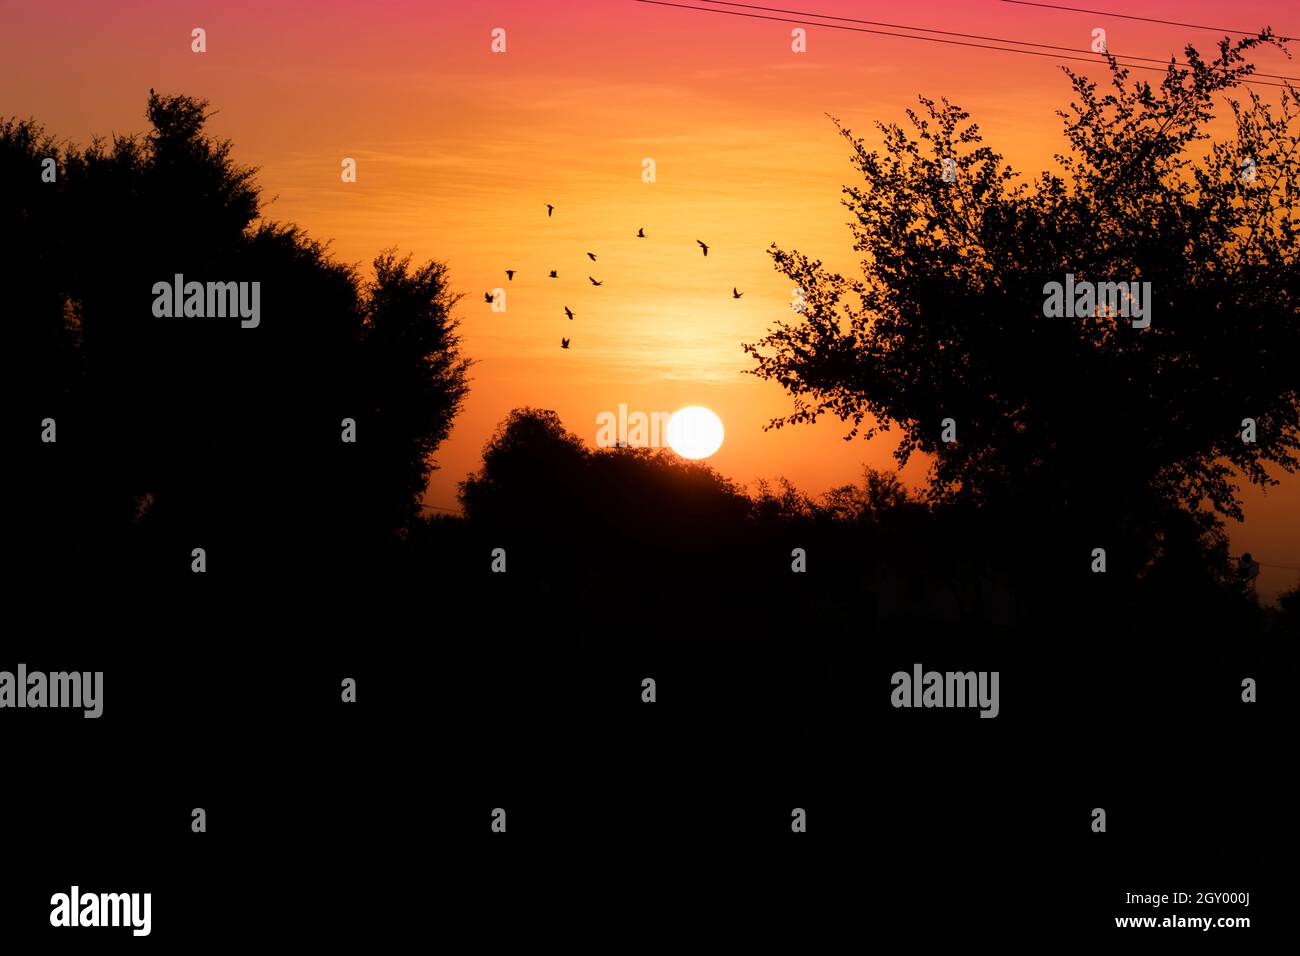 Attractive landscape photograph of sunrise in the morning view and Beautiful view of silhouette trees and silhouette hills and rising sun in the count Stock Photo